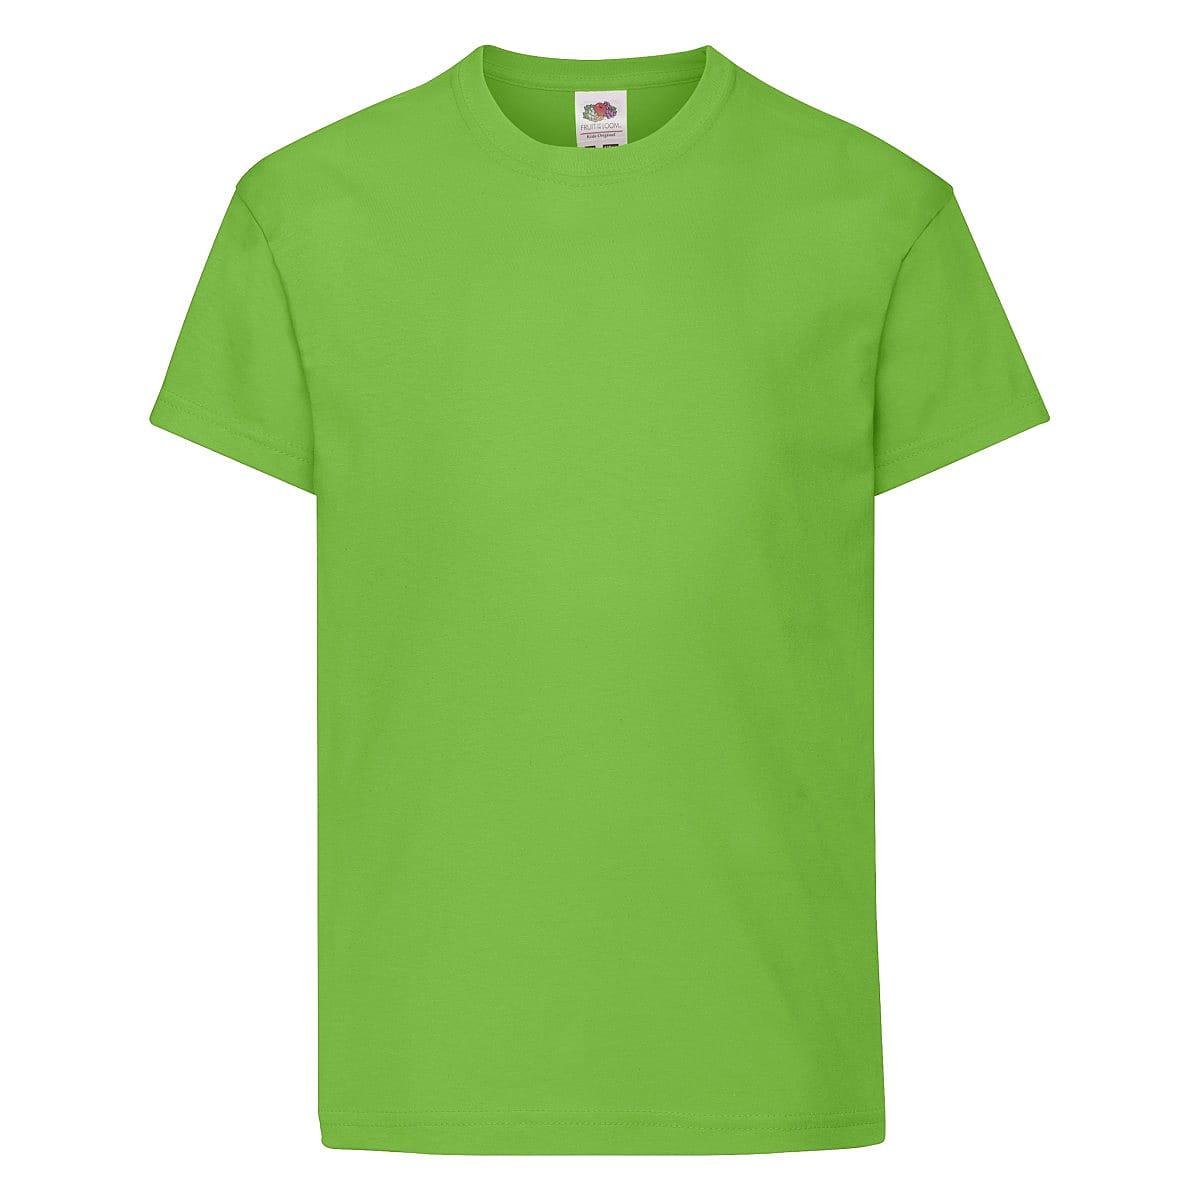 Fruit Of The Loom Kids Original T-Shirt in Lime (Product Code: 61019)